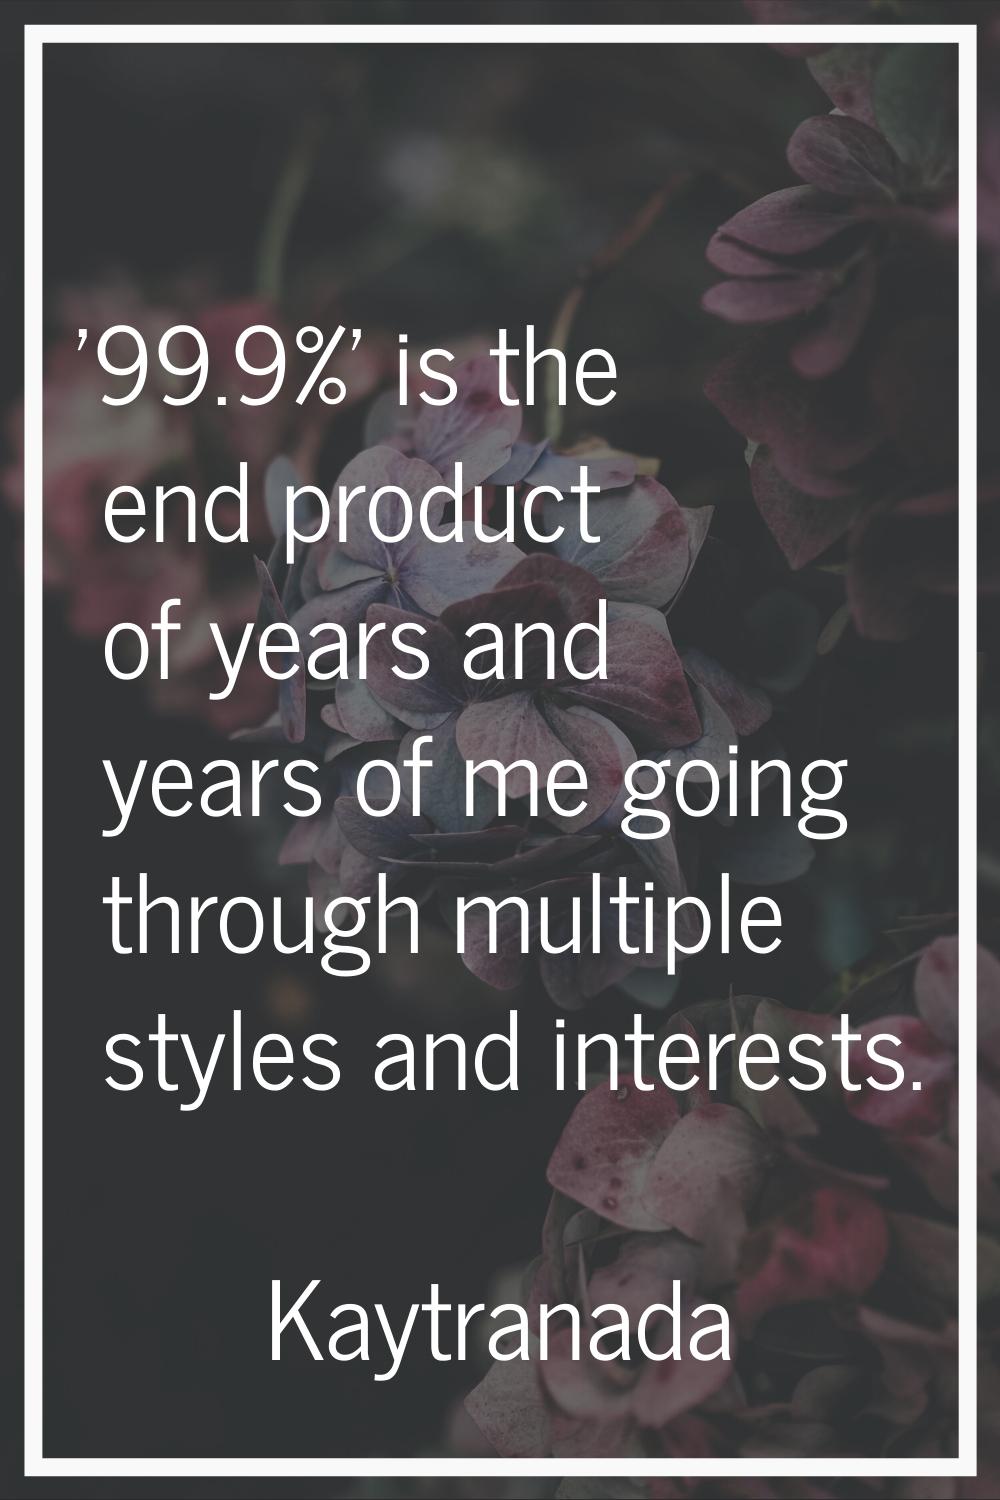 '99.9%' is the end product of years and years of me going through multiple styles and interests.